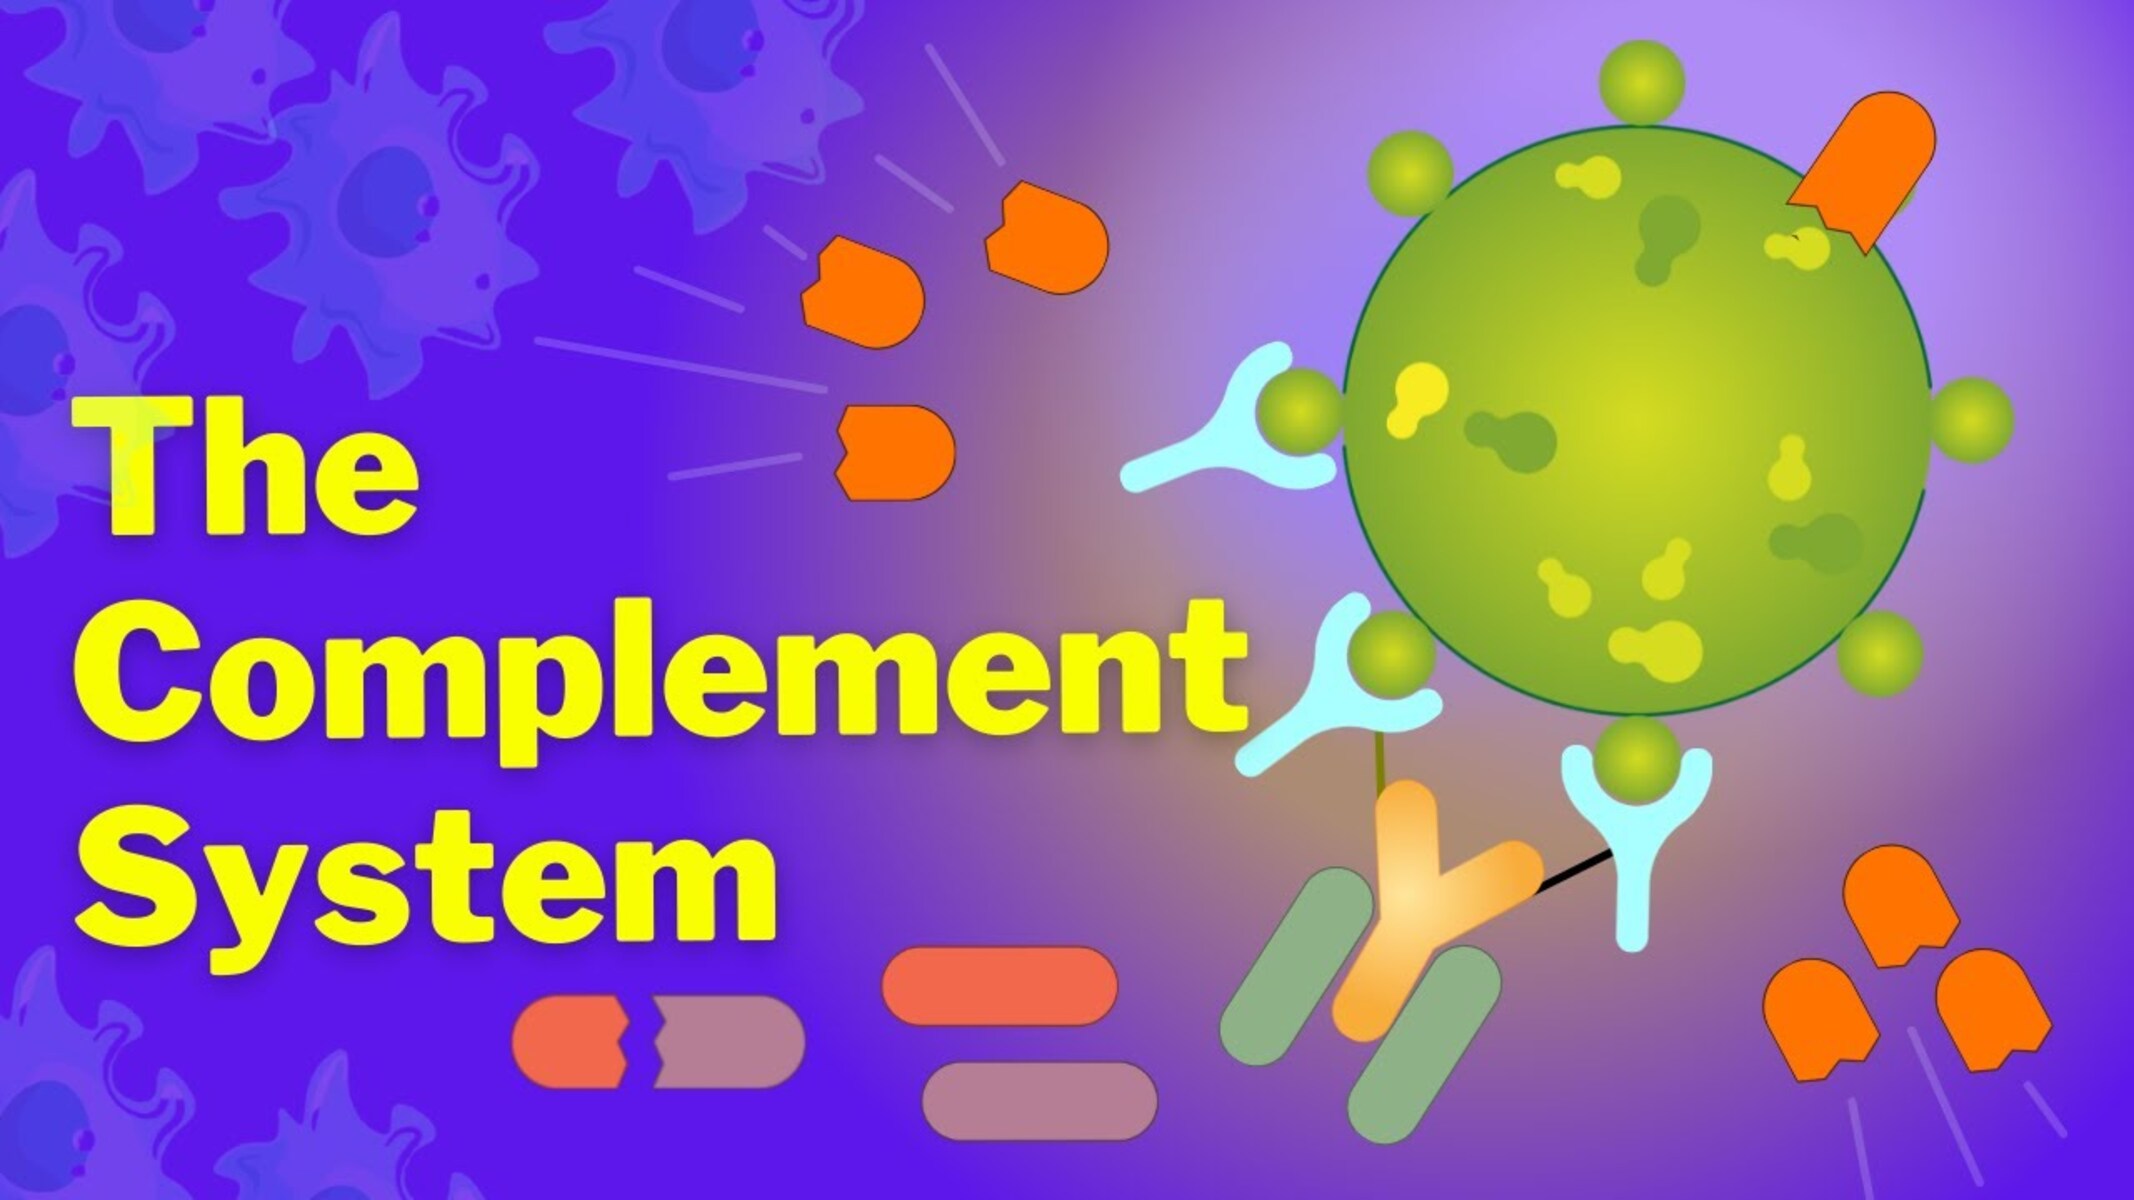 20-extraordinary-facts-about-complement-system